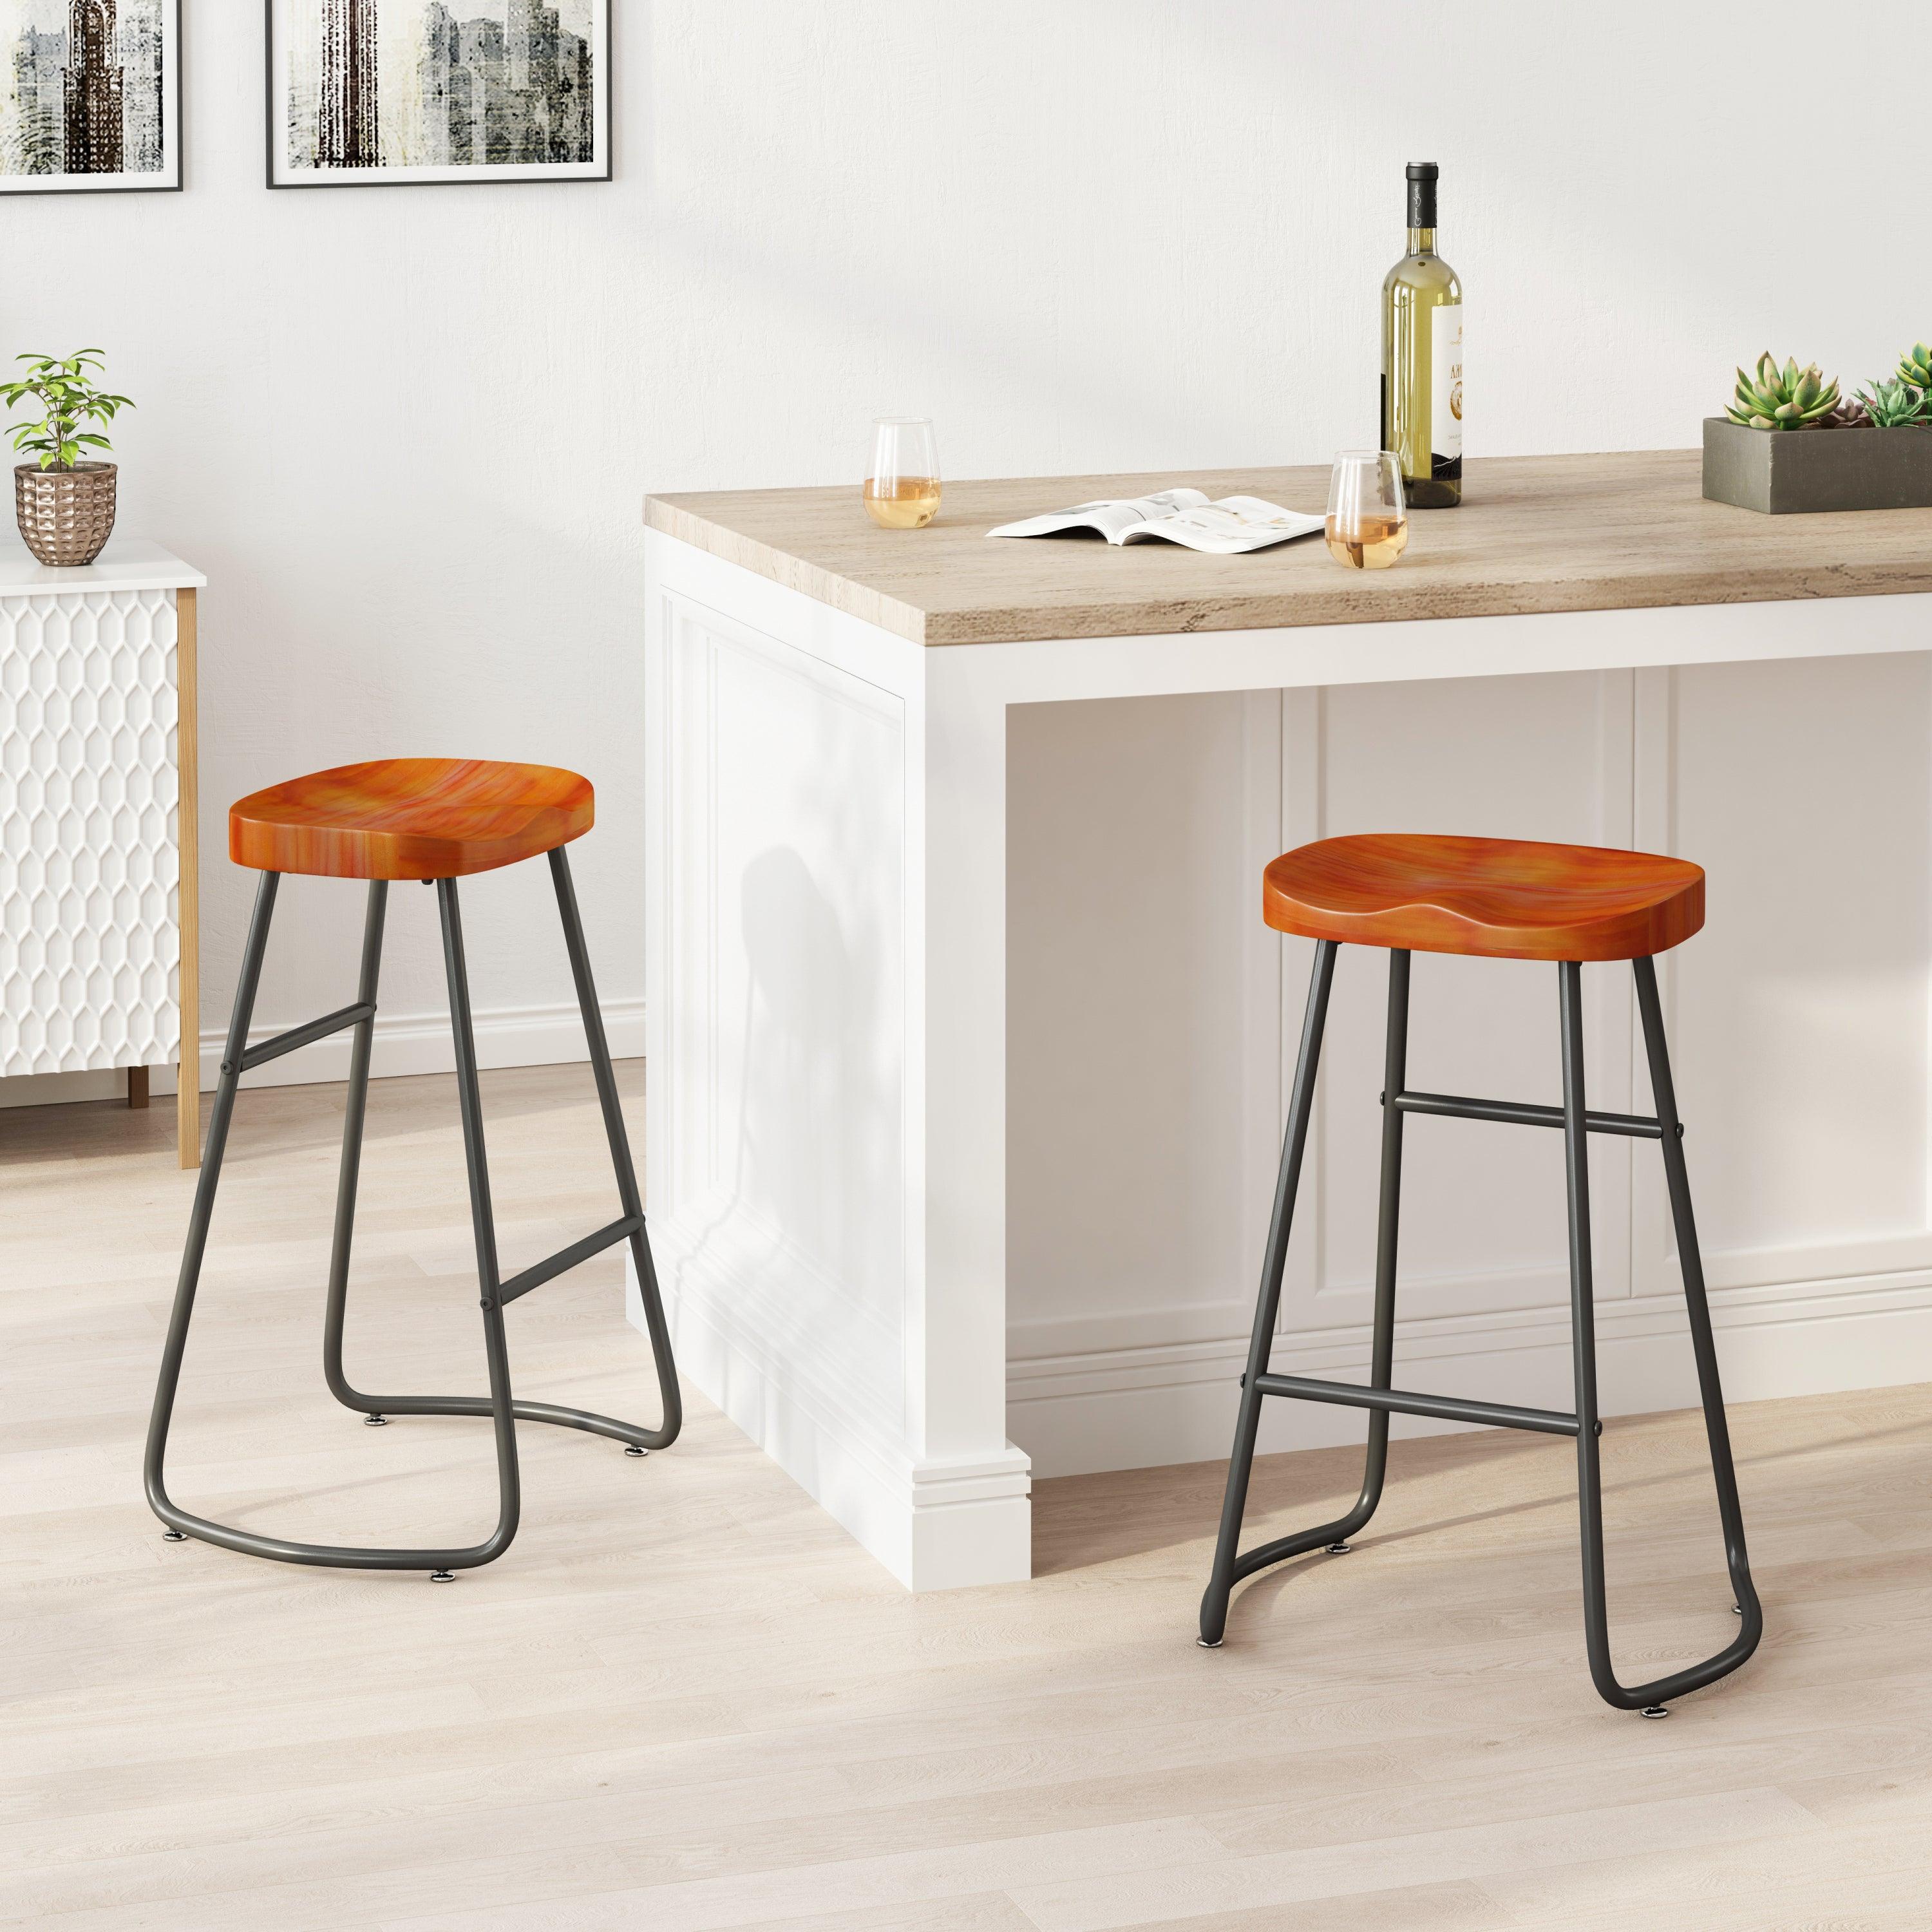 29.52" Stylish and Minimalist Bar Stools, Two-piece Counter Height Bar Stools, for Kitchen Island, Coffee Shop, Bar, Home Balcony, Brown